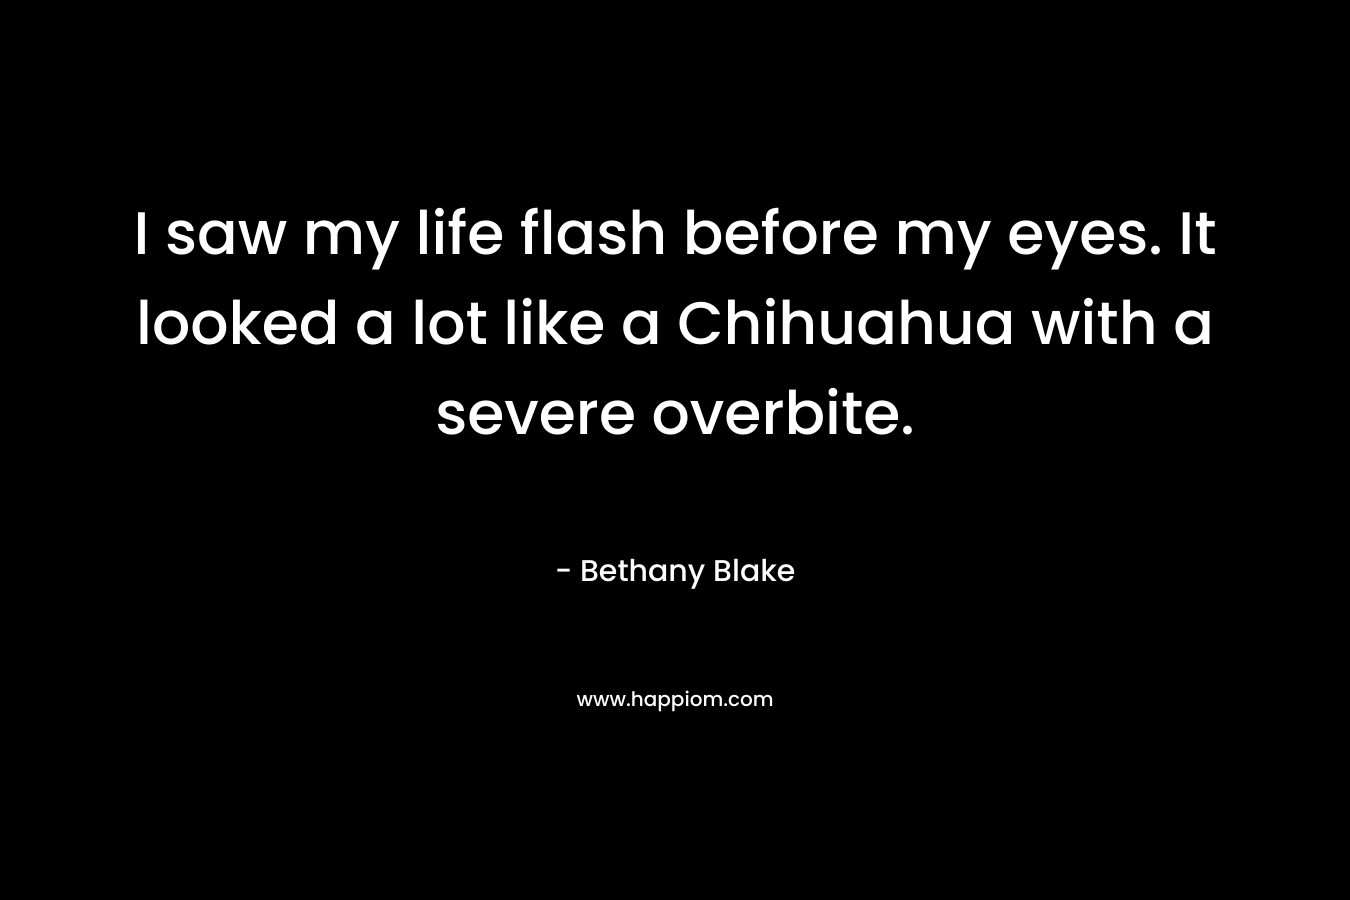 I saw my life flash before my eyes. It looked a lot like a Chihuahua with a severe overbite. – Bethany Blake